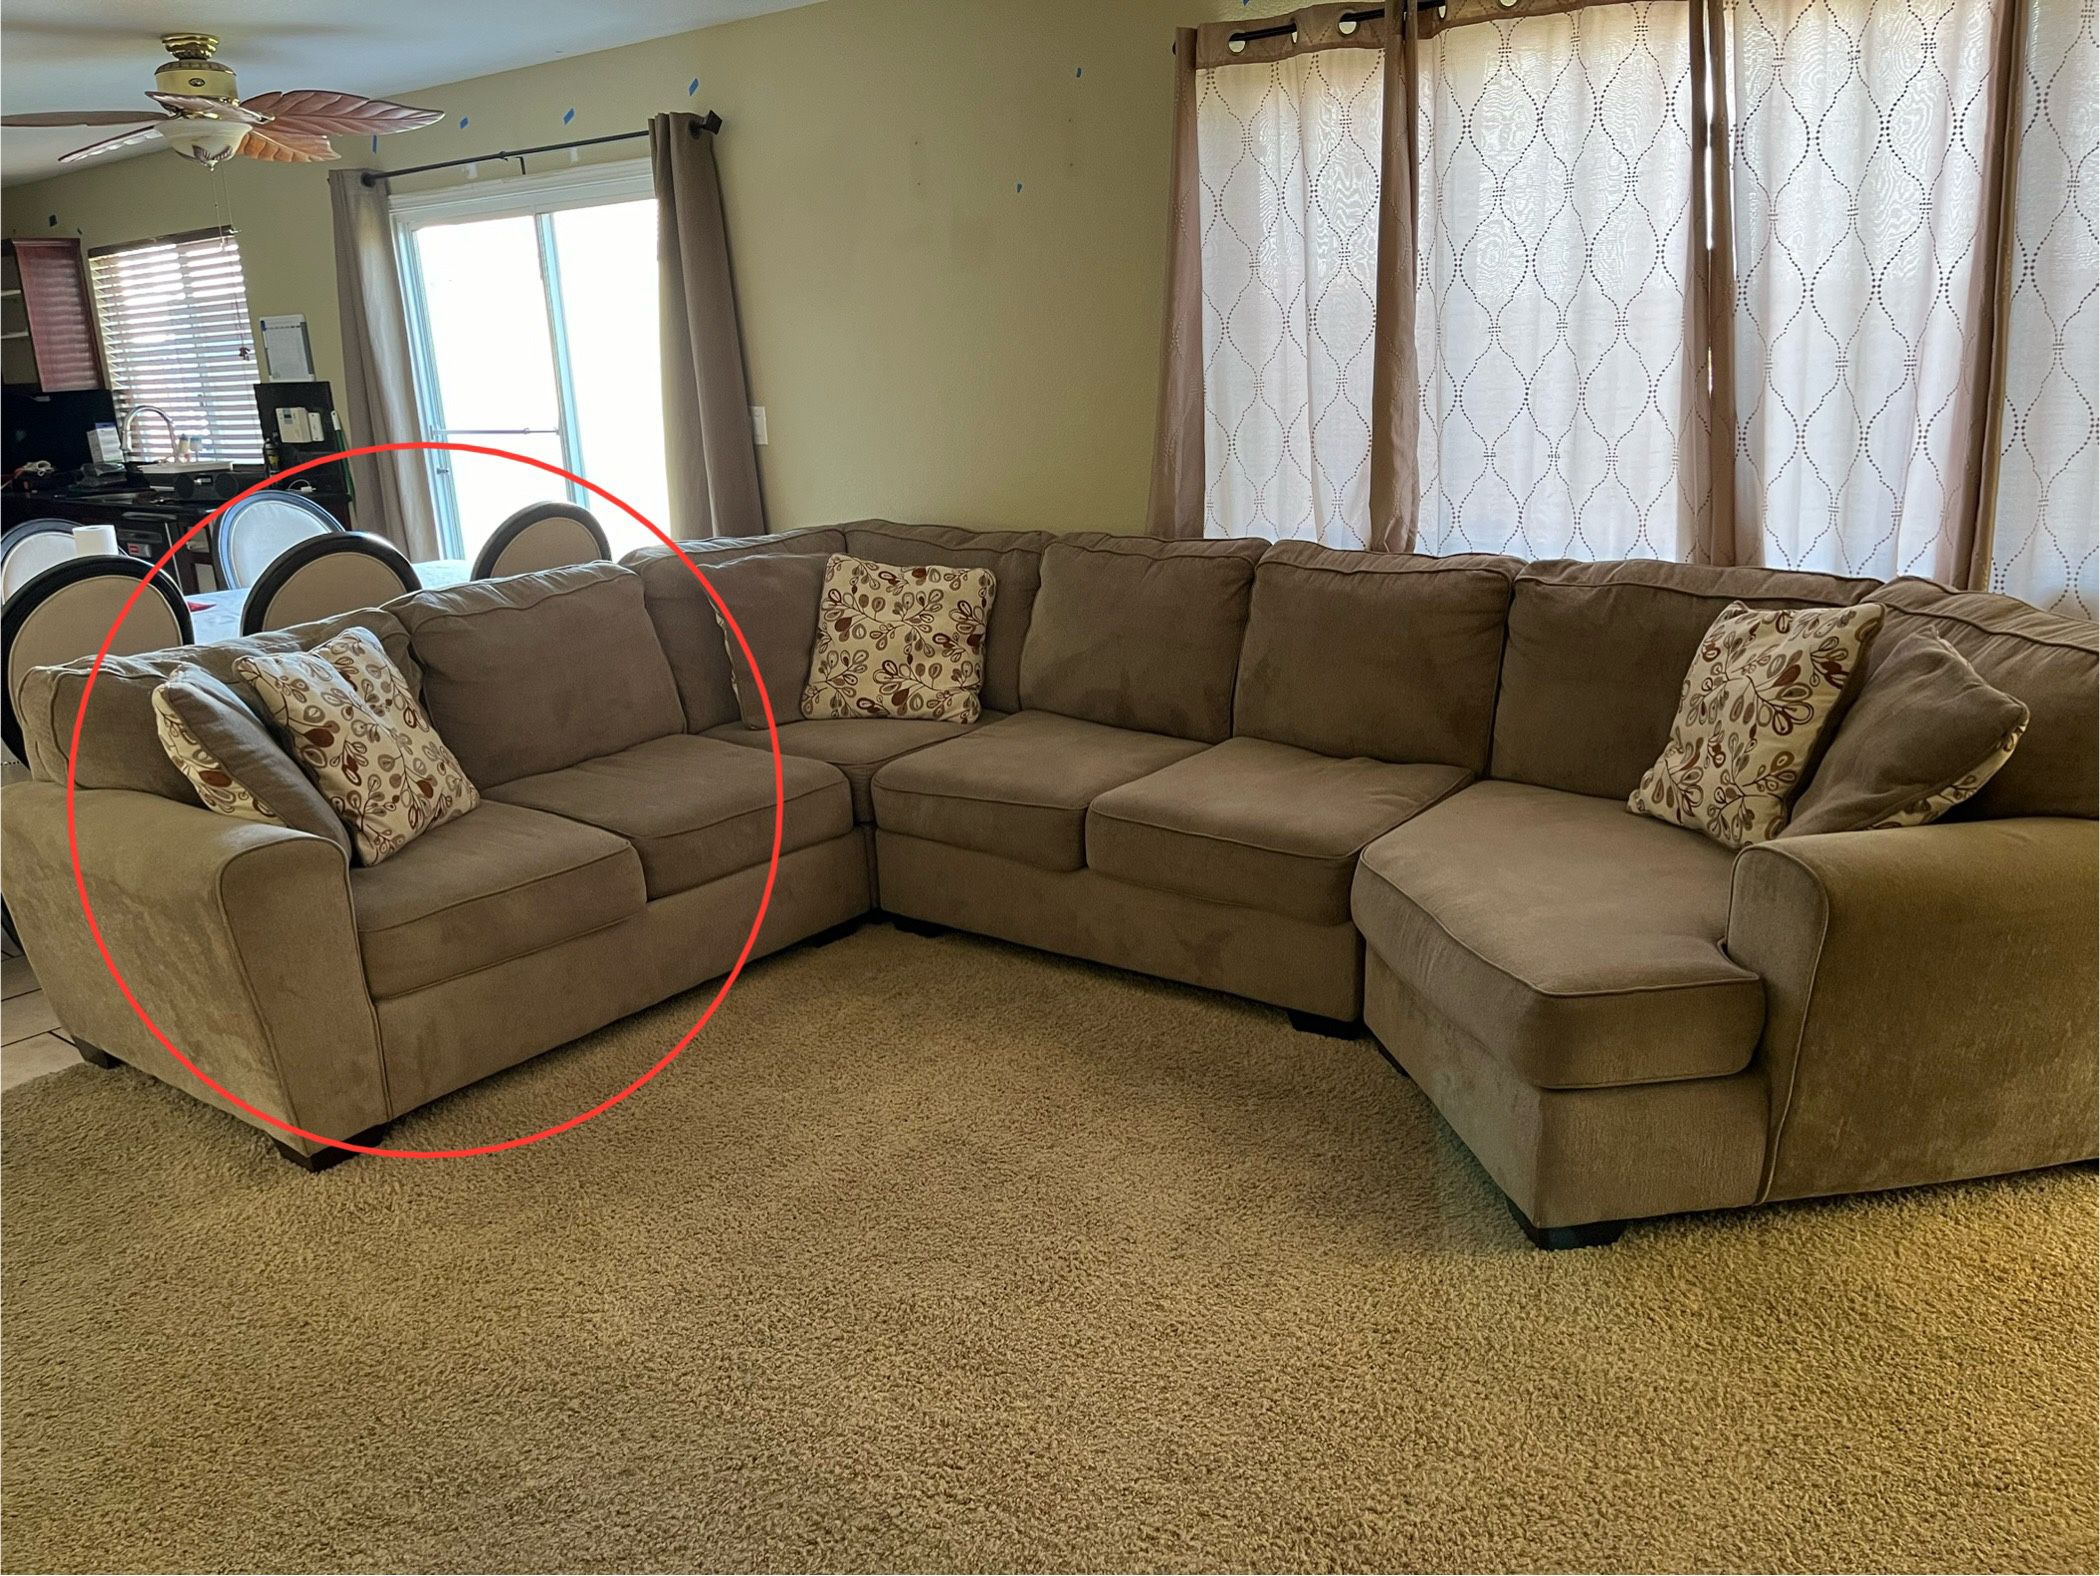 Used Large Sectional Couch w/6 Pillows $350/OBO